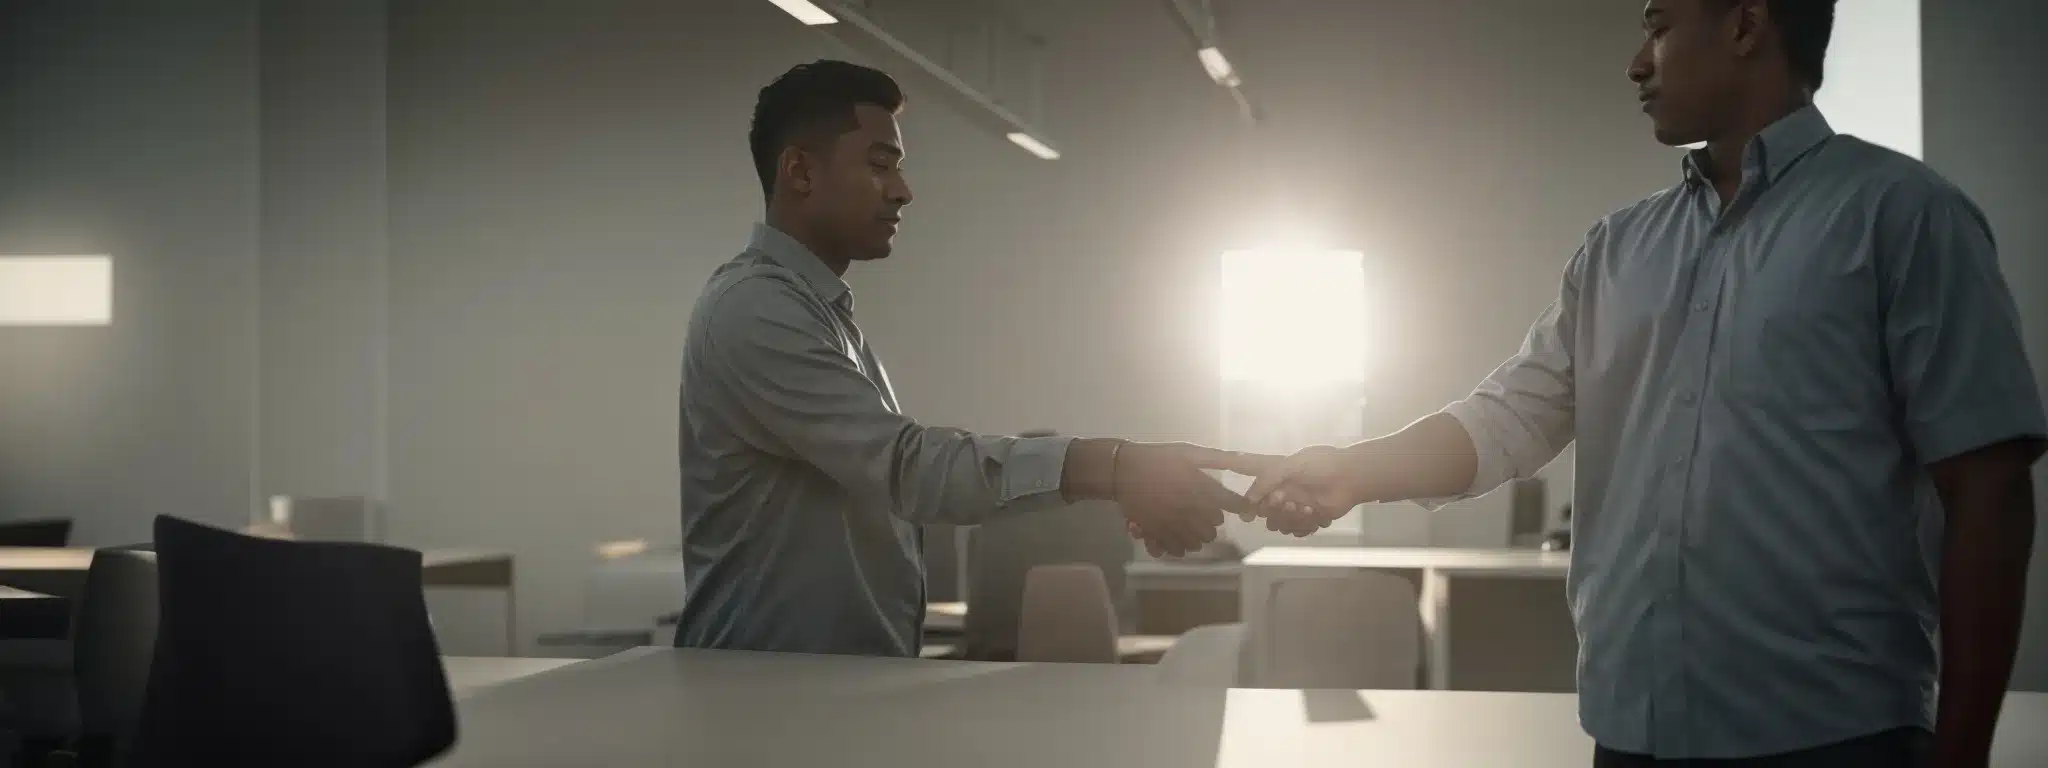 A Spotlight Shines On Two People Shaking Hands In A Minimalist, Modern Office, Symbolizing A Strategic Partnership.